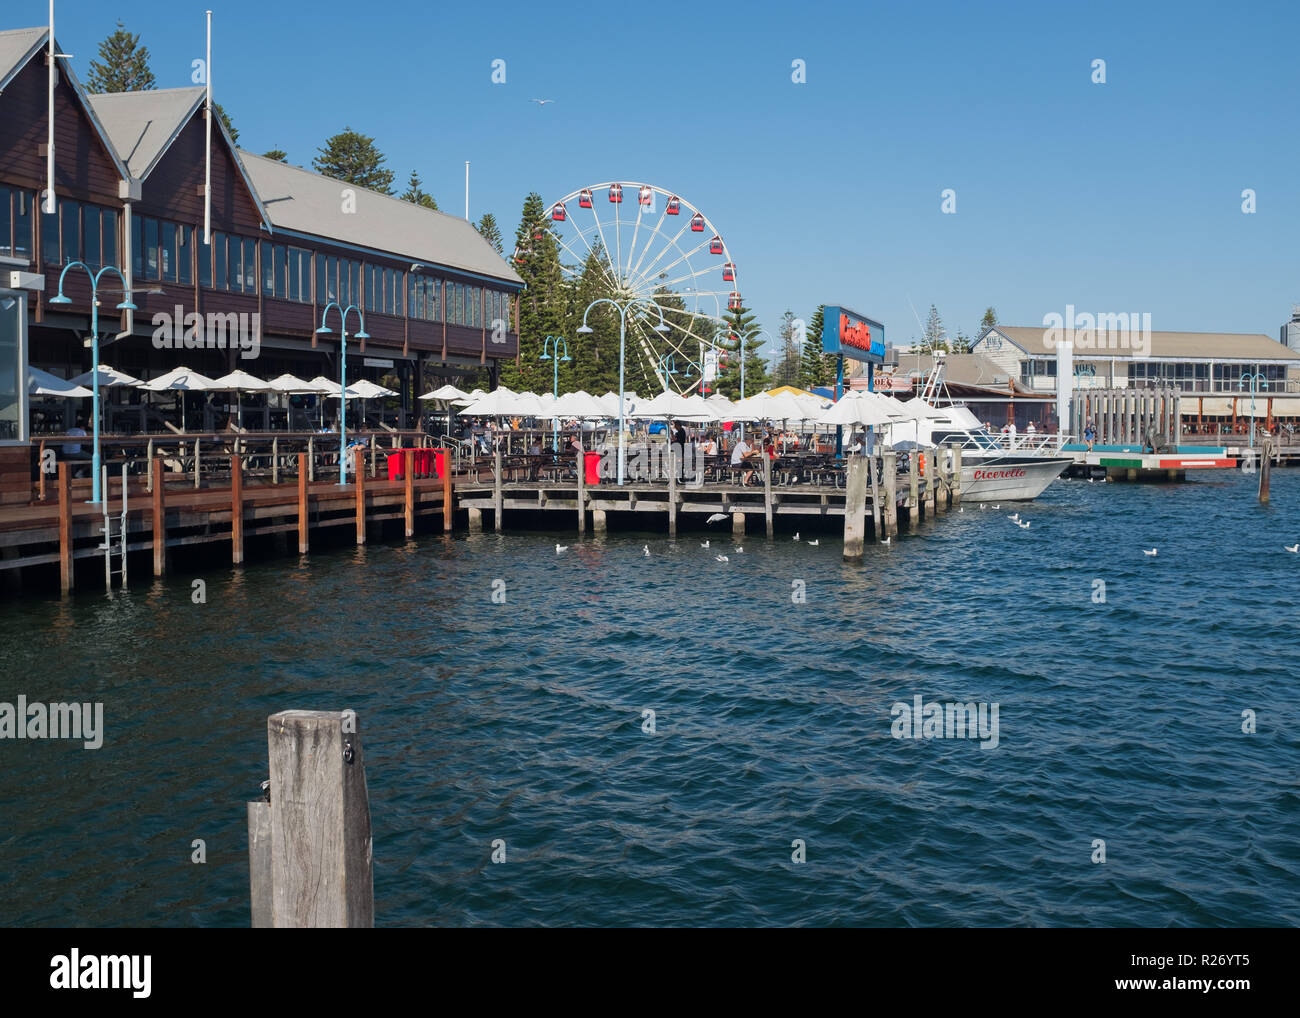 View of Fishing Boat Harbour with Skyview Observation Wheel in background, Fremantle, Western Australia, Australia Stock Photo